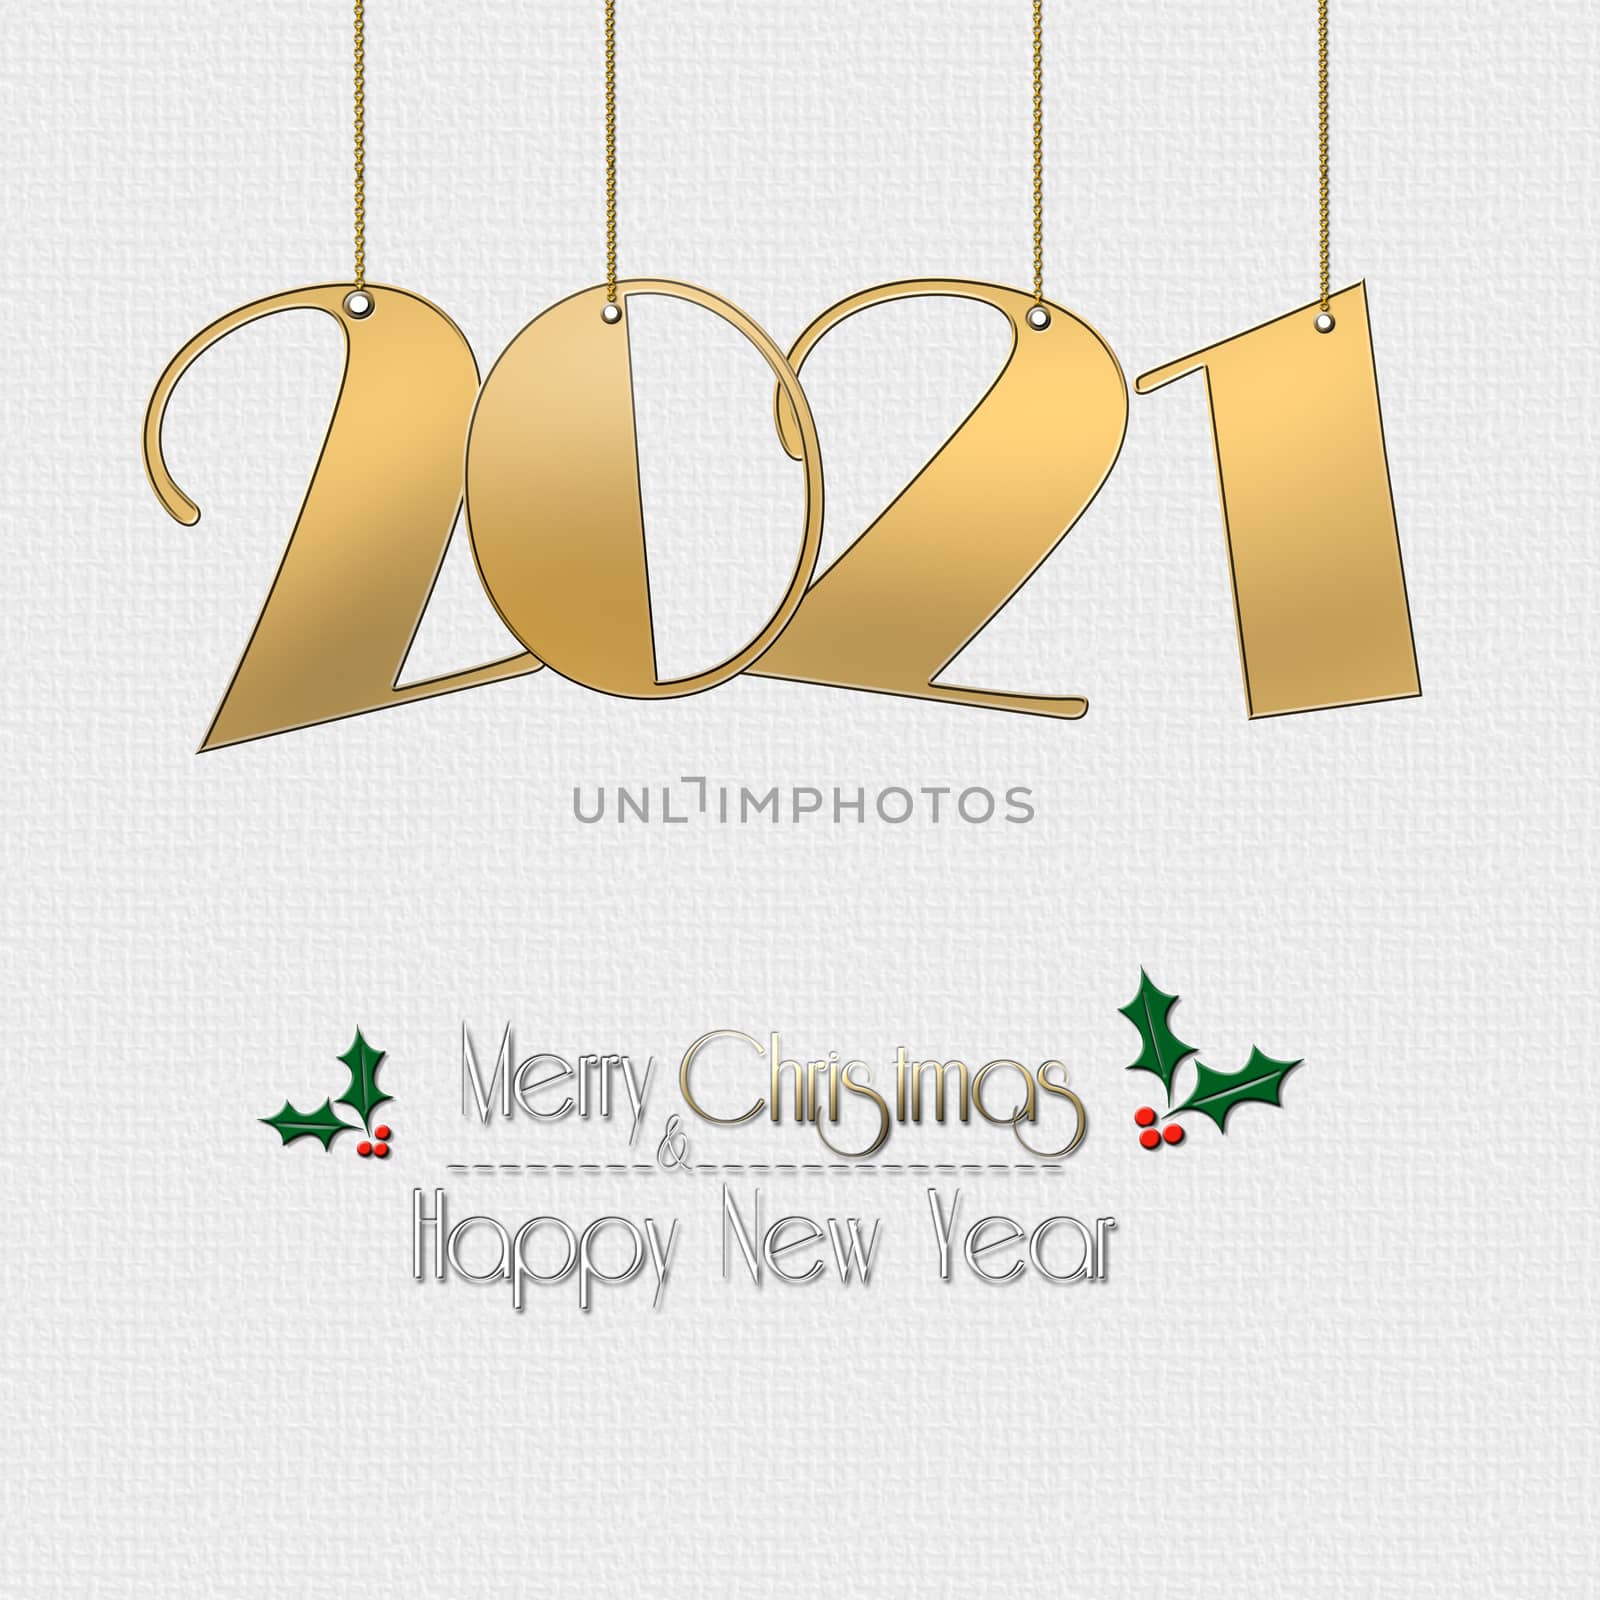 Minimalist Happy New 2021 Year and Christmas design with hanging gold 2021 digit on white background. Text Merry Christmas Happy New Year with holly leaves. 3D illustration